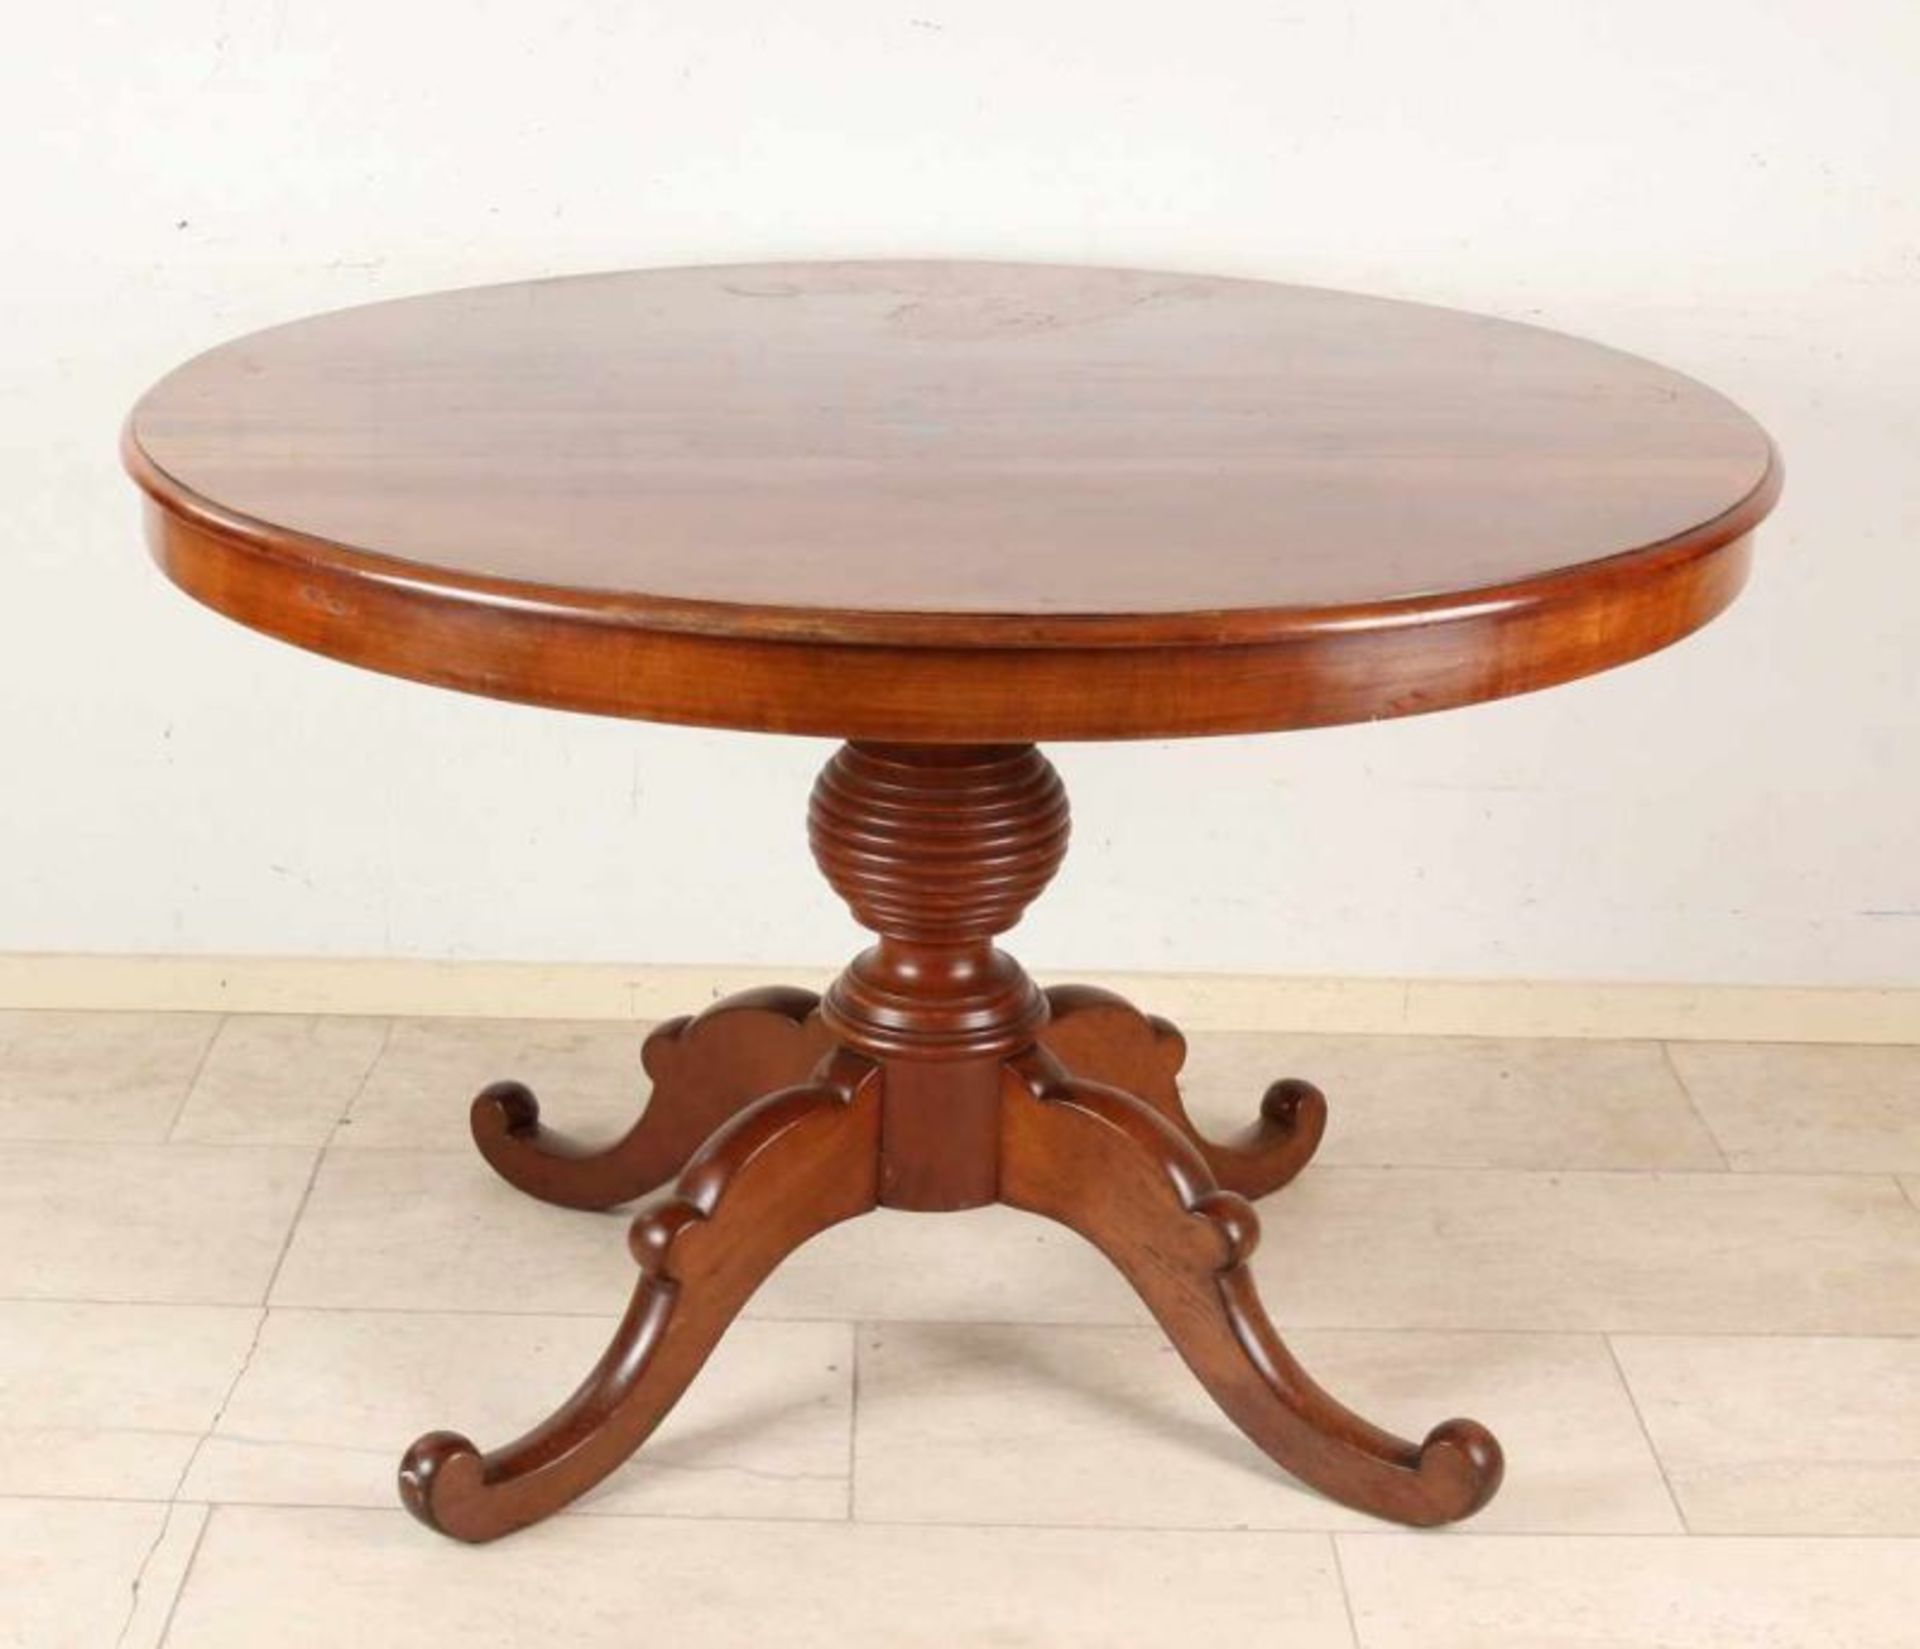 Antique mahogany Louis Philippe dining table. Circa 1860. Dimensions: H 76 x ø 115 cm. In good